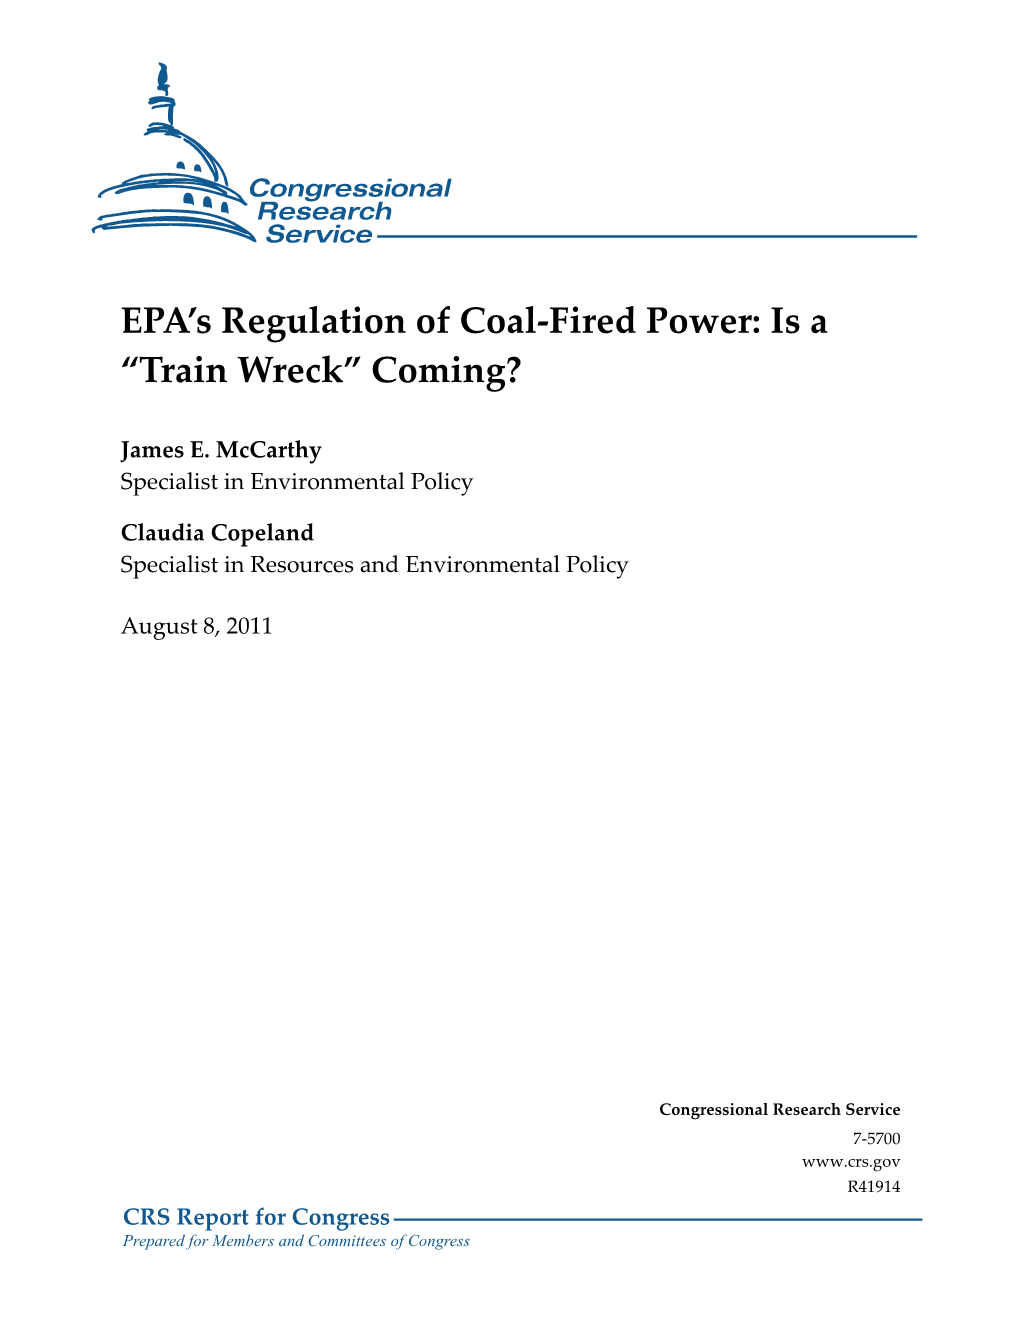 EPA's Regulation of Coal-Fired Power: Is a “Train Wreck” Coming?